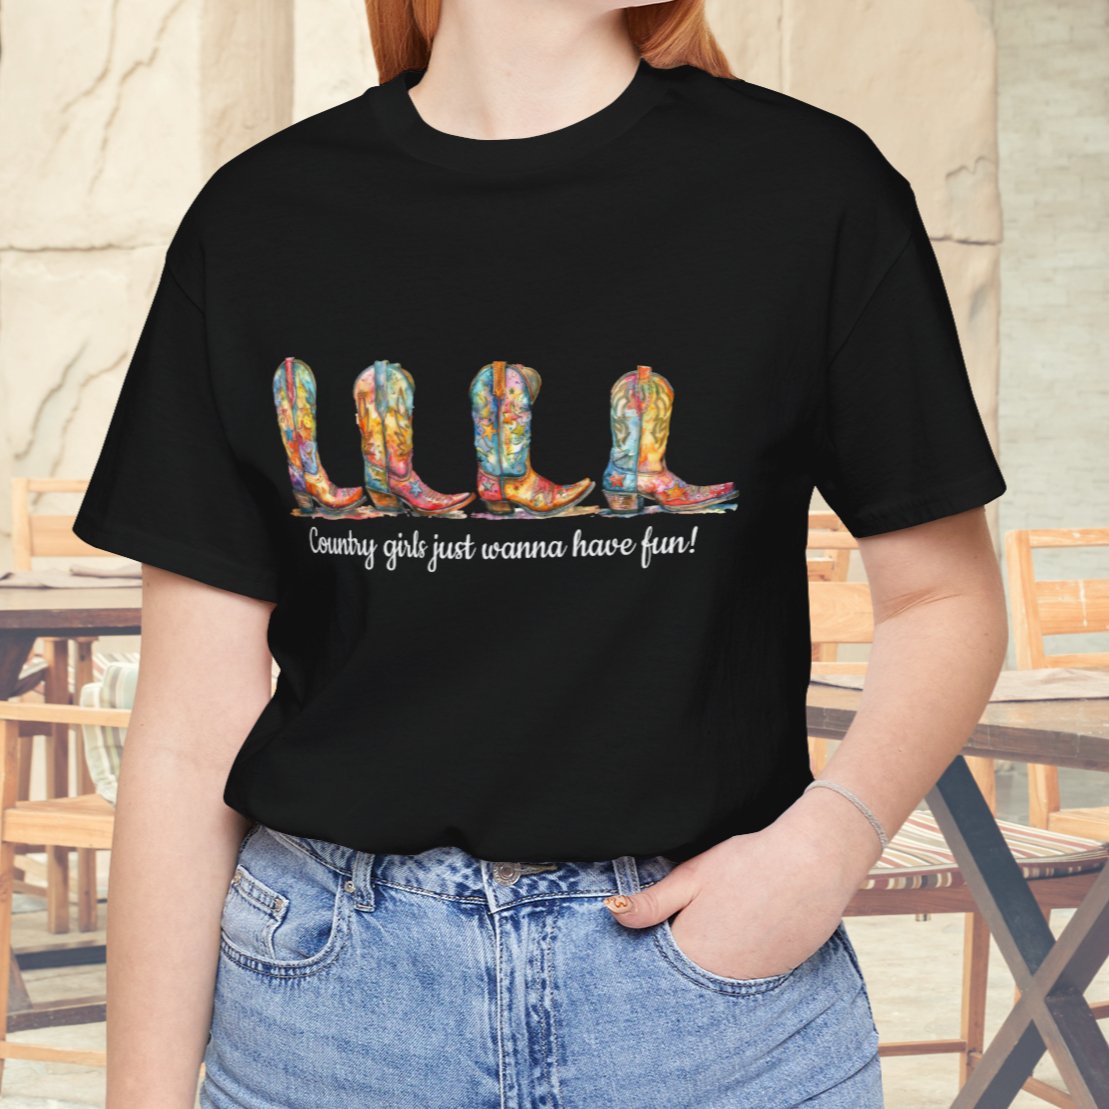 Cowgirl Boots T-Shirt, Country Concert Party Tee, Western Graphic Tee Girls Wanna Have Fun - FlooredByArt